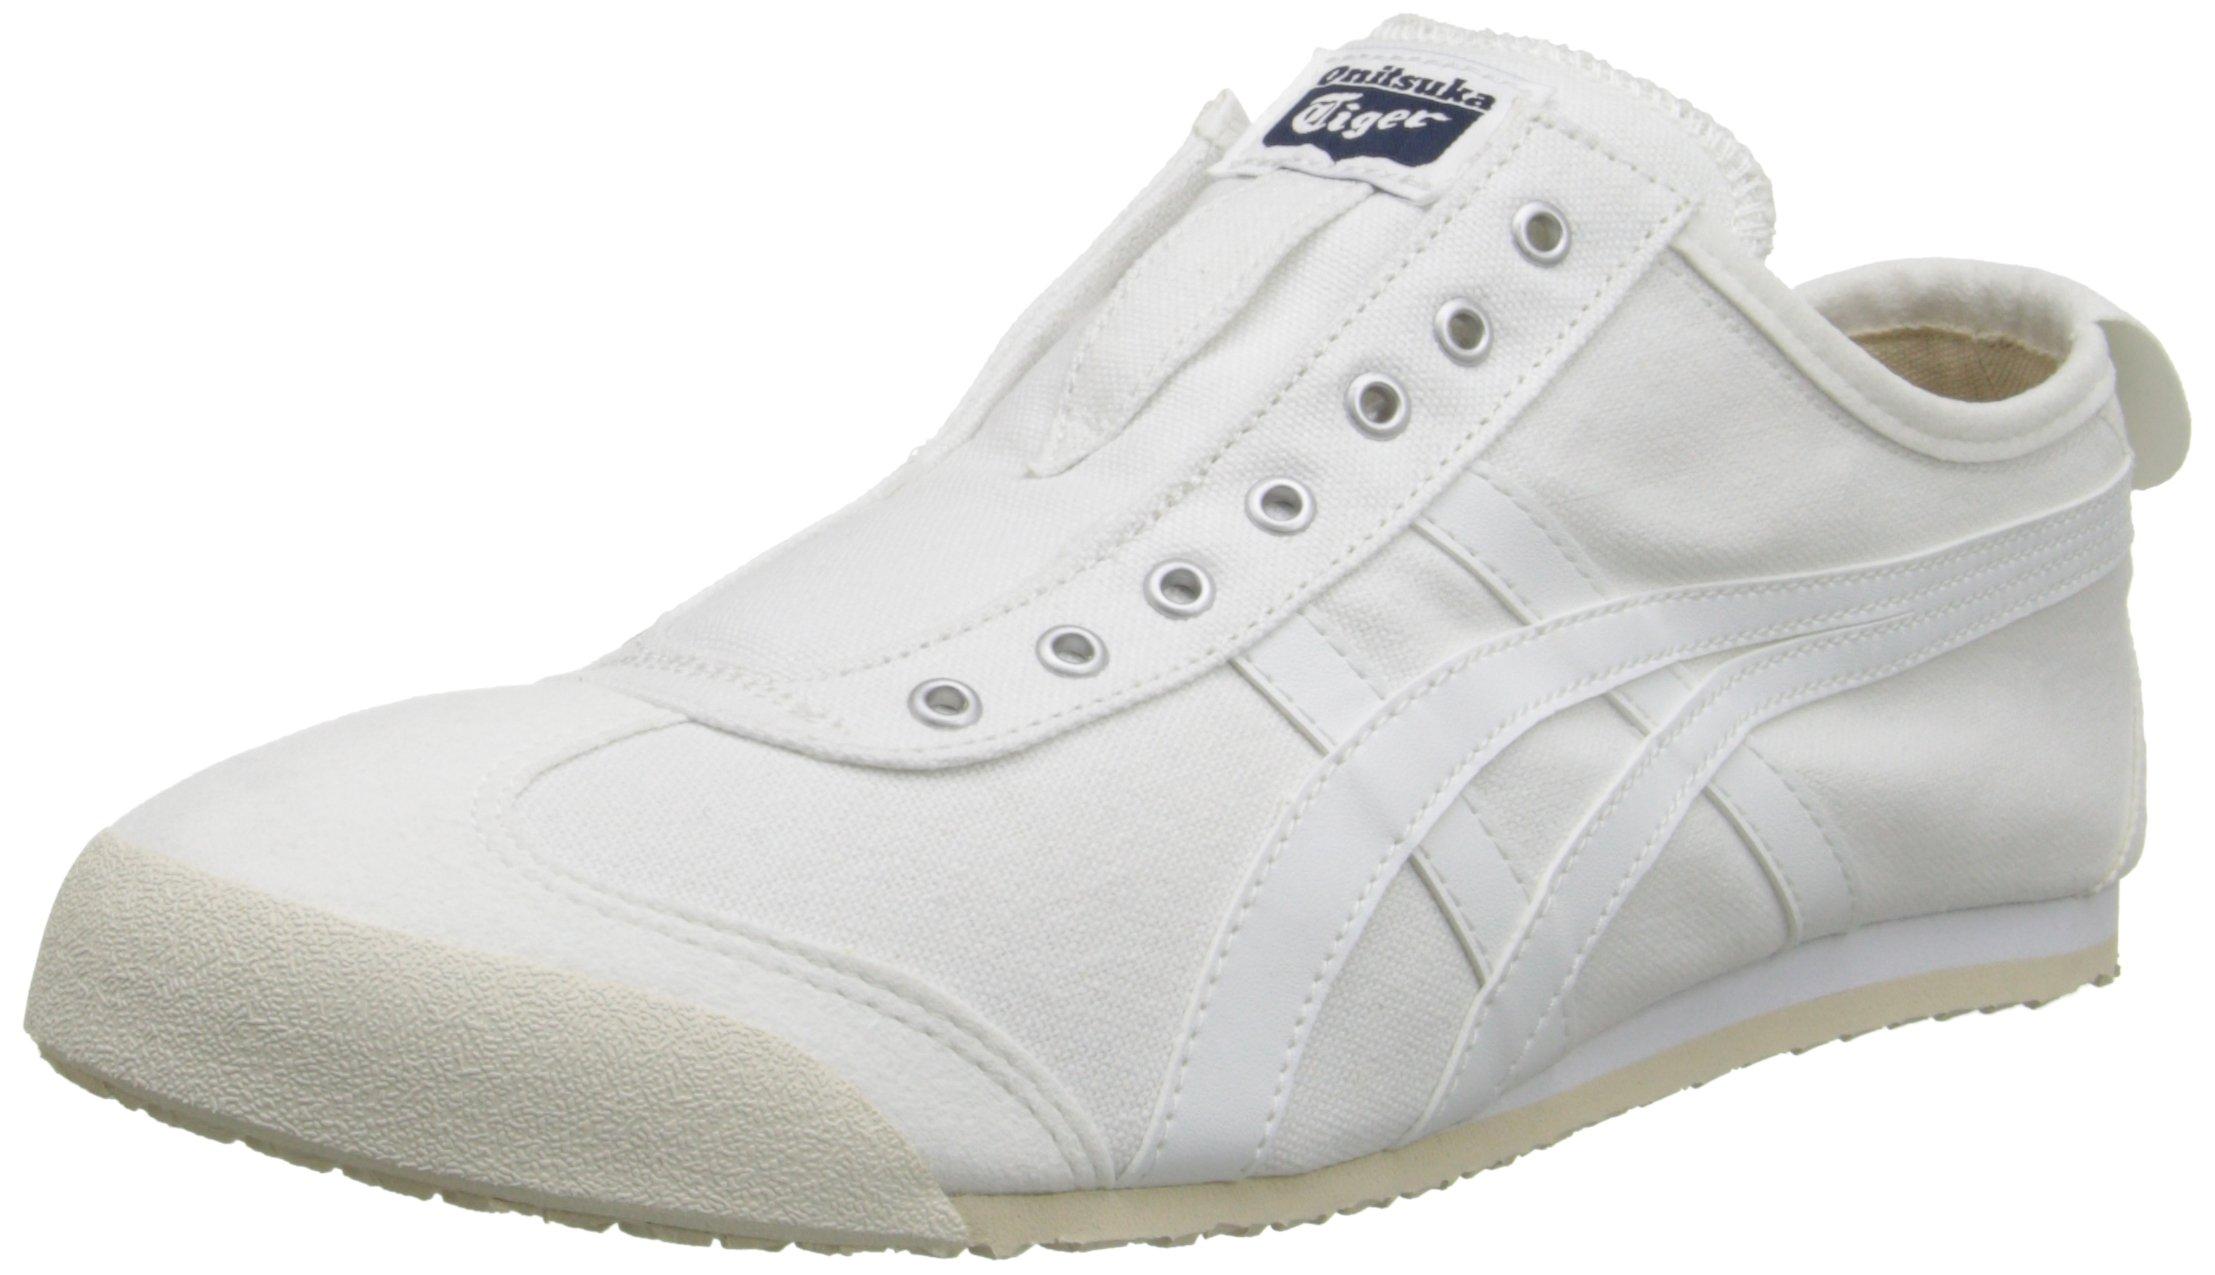 Asics Canvas S Onitsuka Tiger Mexico 66 Slip-on Shoes in White White ...